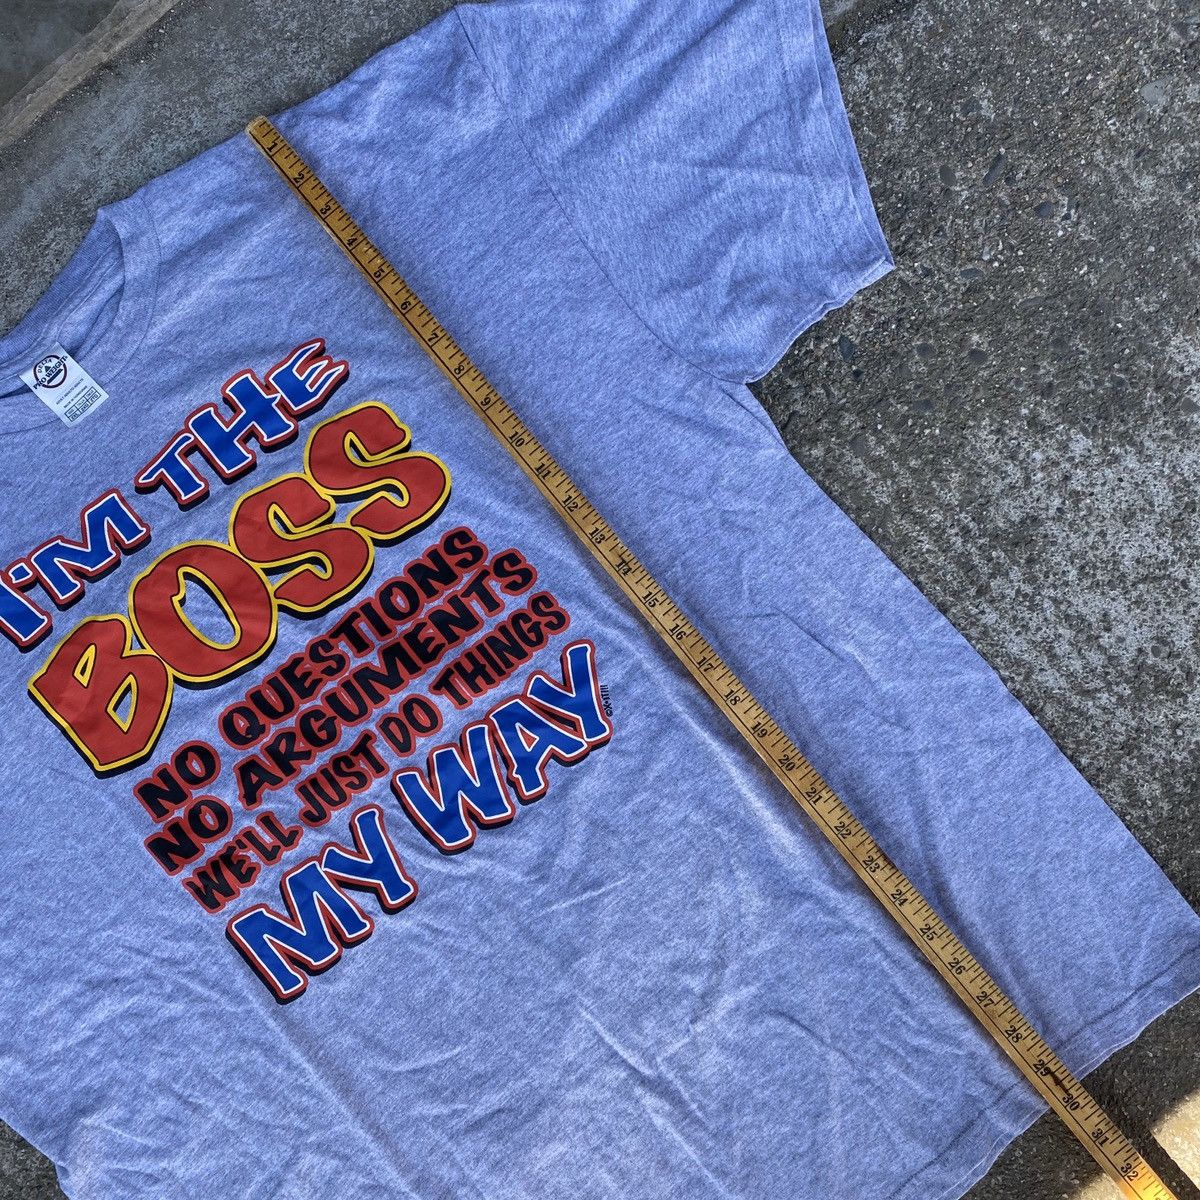 Vintage VINTAGE IM THE BOSS FUNNY IRONIC T SHIRT USA DELTA Y2K 90s Size US XXL / EU 58 / 5 - 3 Preview